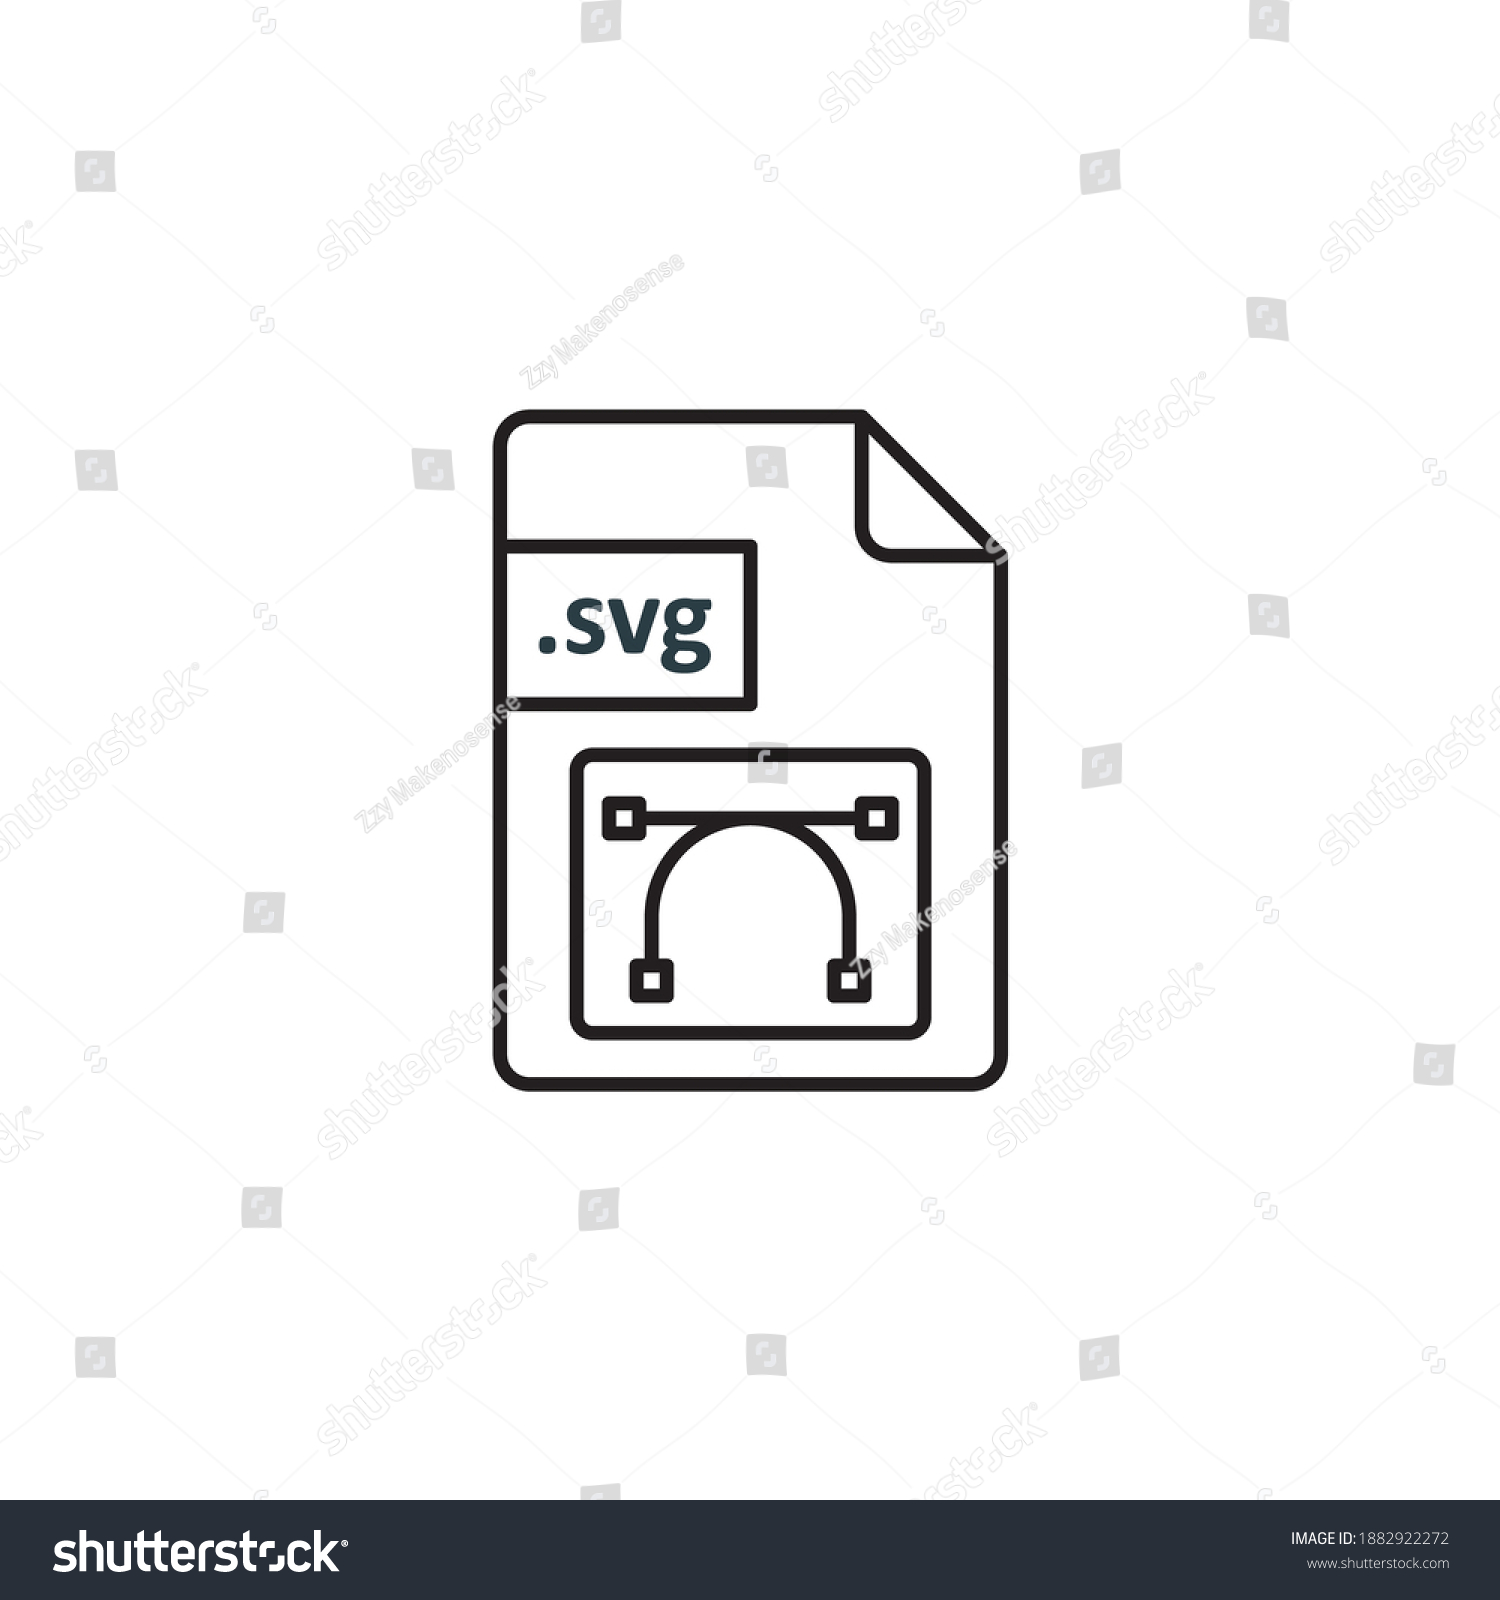 SVG of SVG file icon. Icon design for extension files, folders and documents. Vector svg